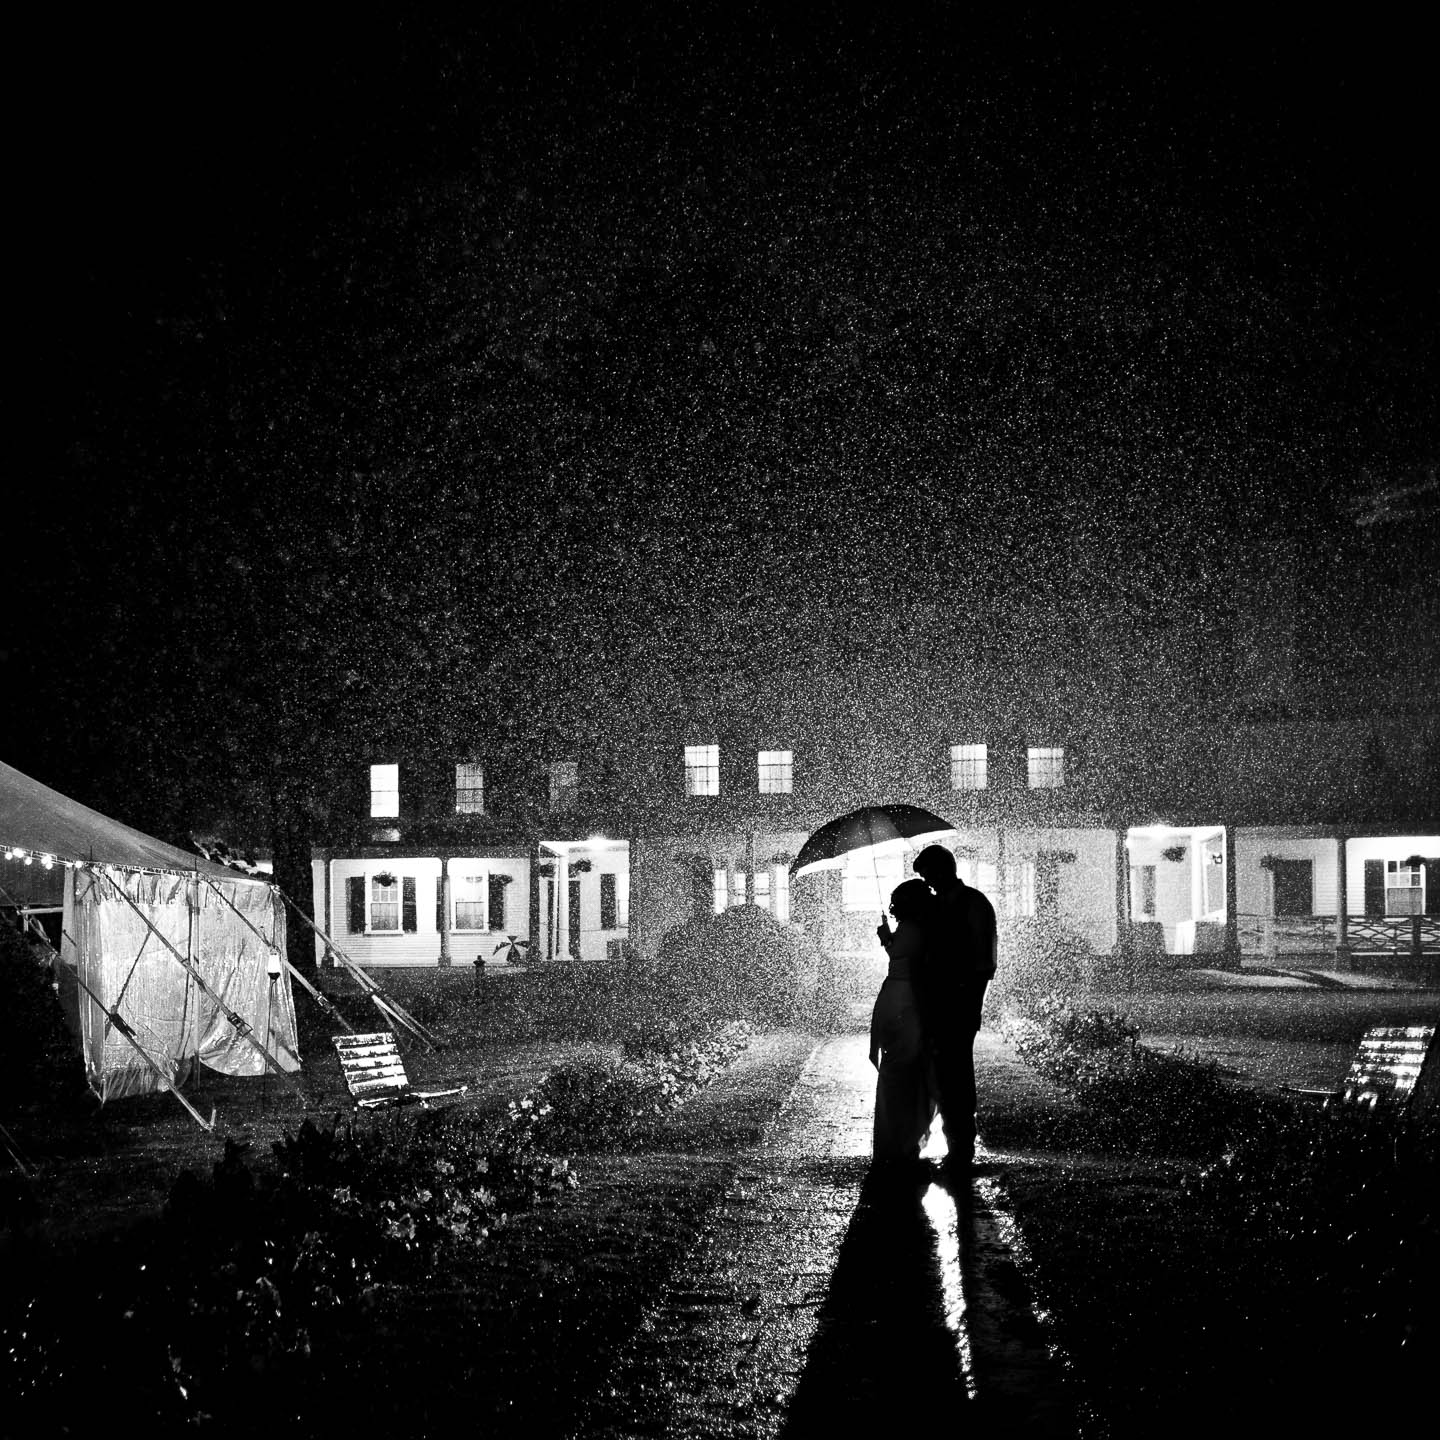 Black and white image of a bride and groom standing under an umbrella in the rain on their wedding day at night in front of their venue